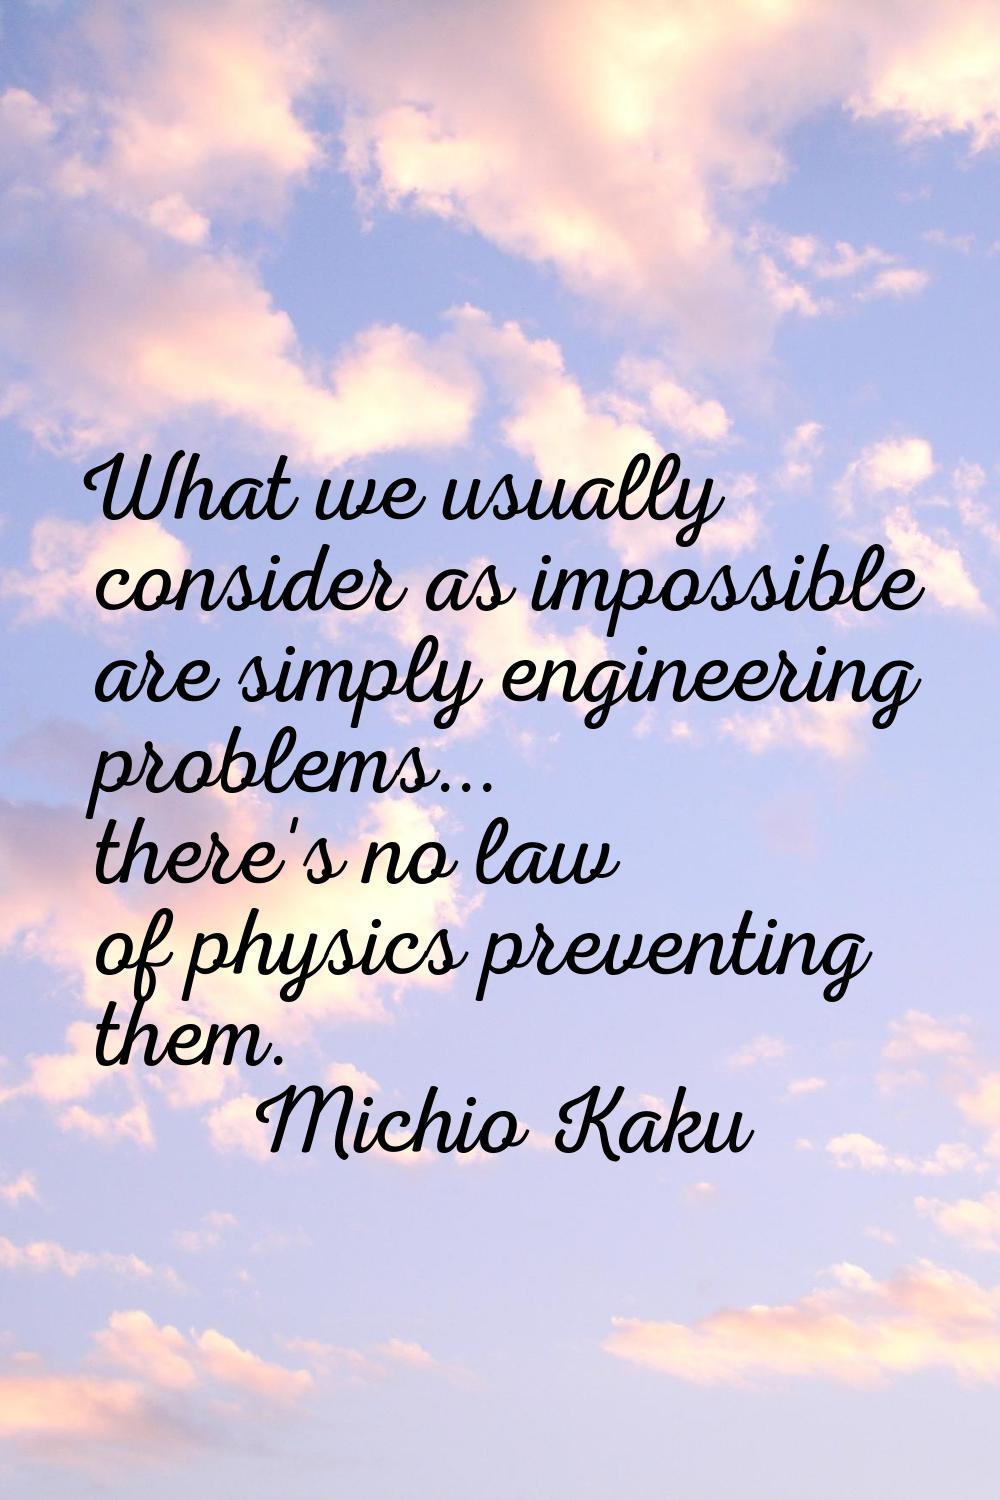 What we usually consider as impossible are simply engineering problems... there's no law of physics